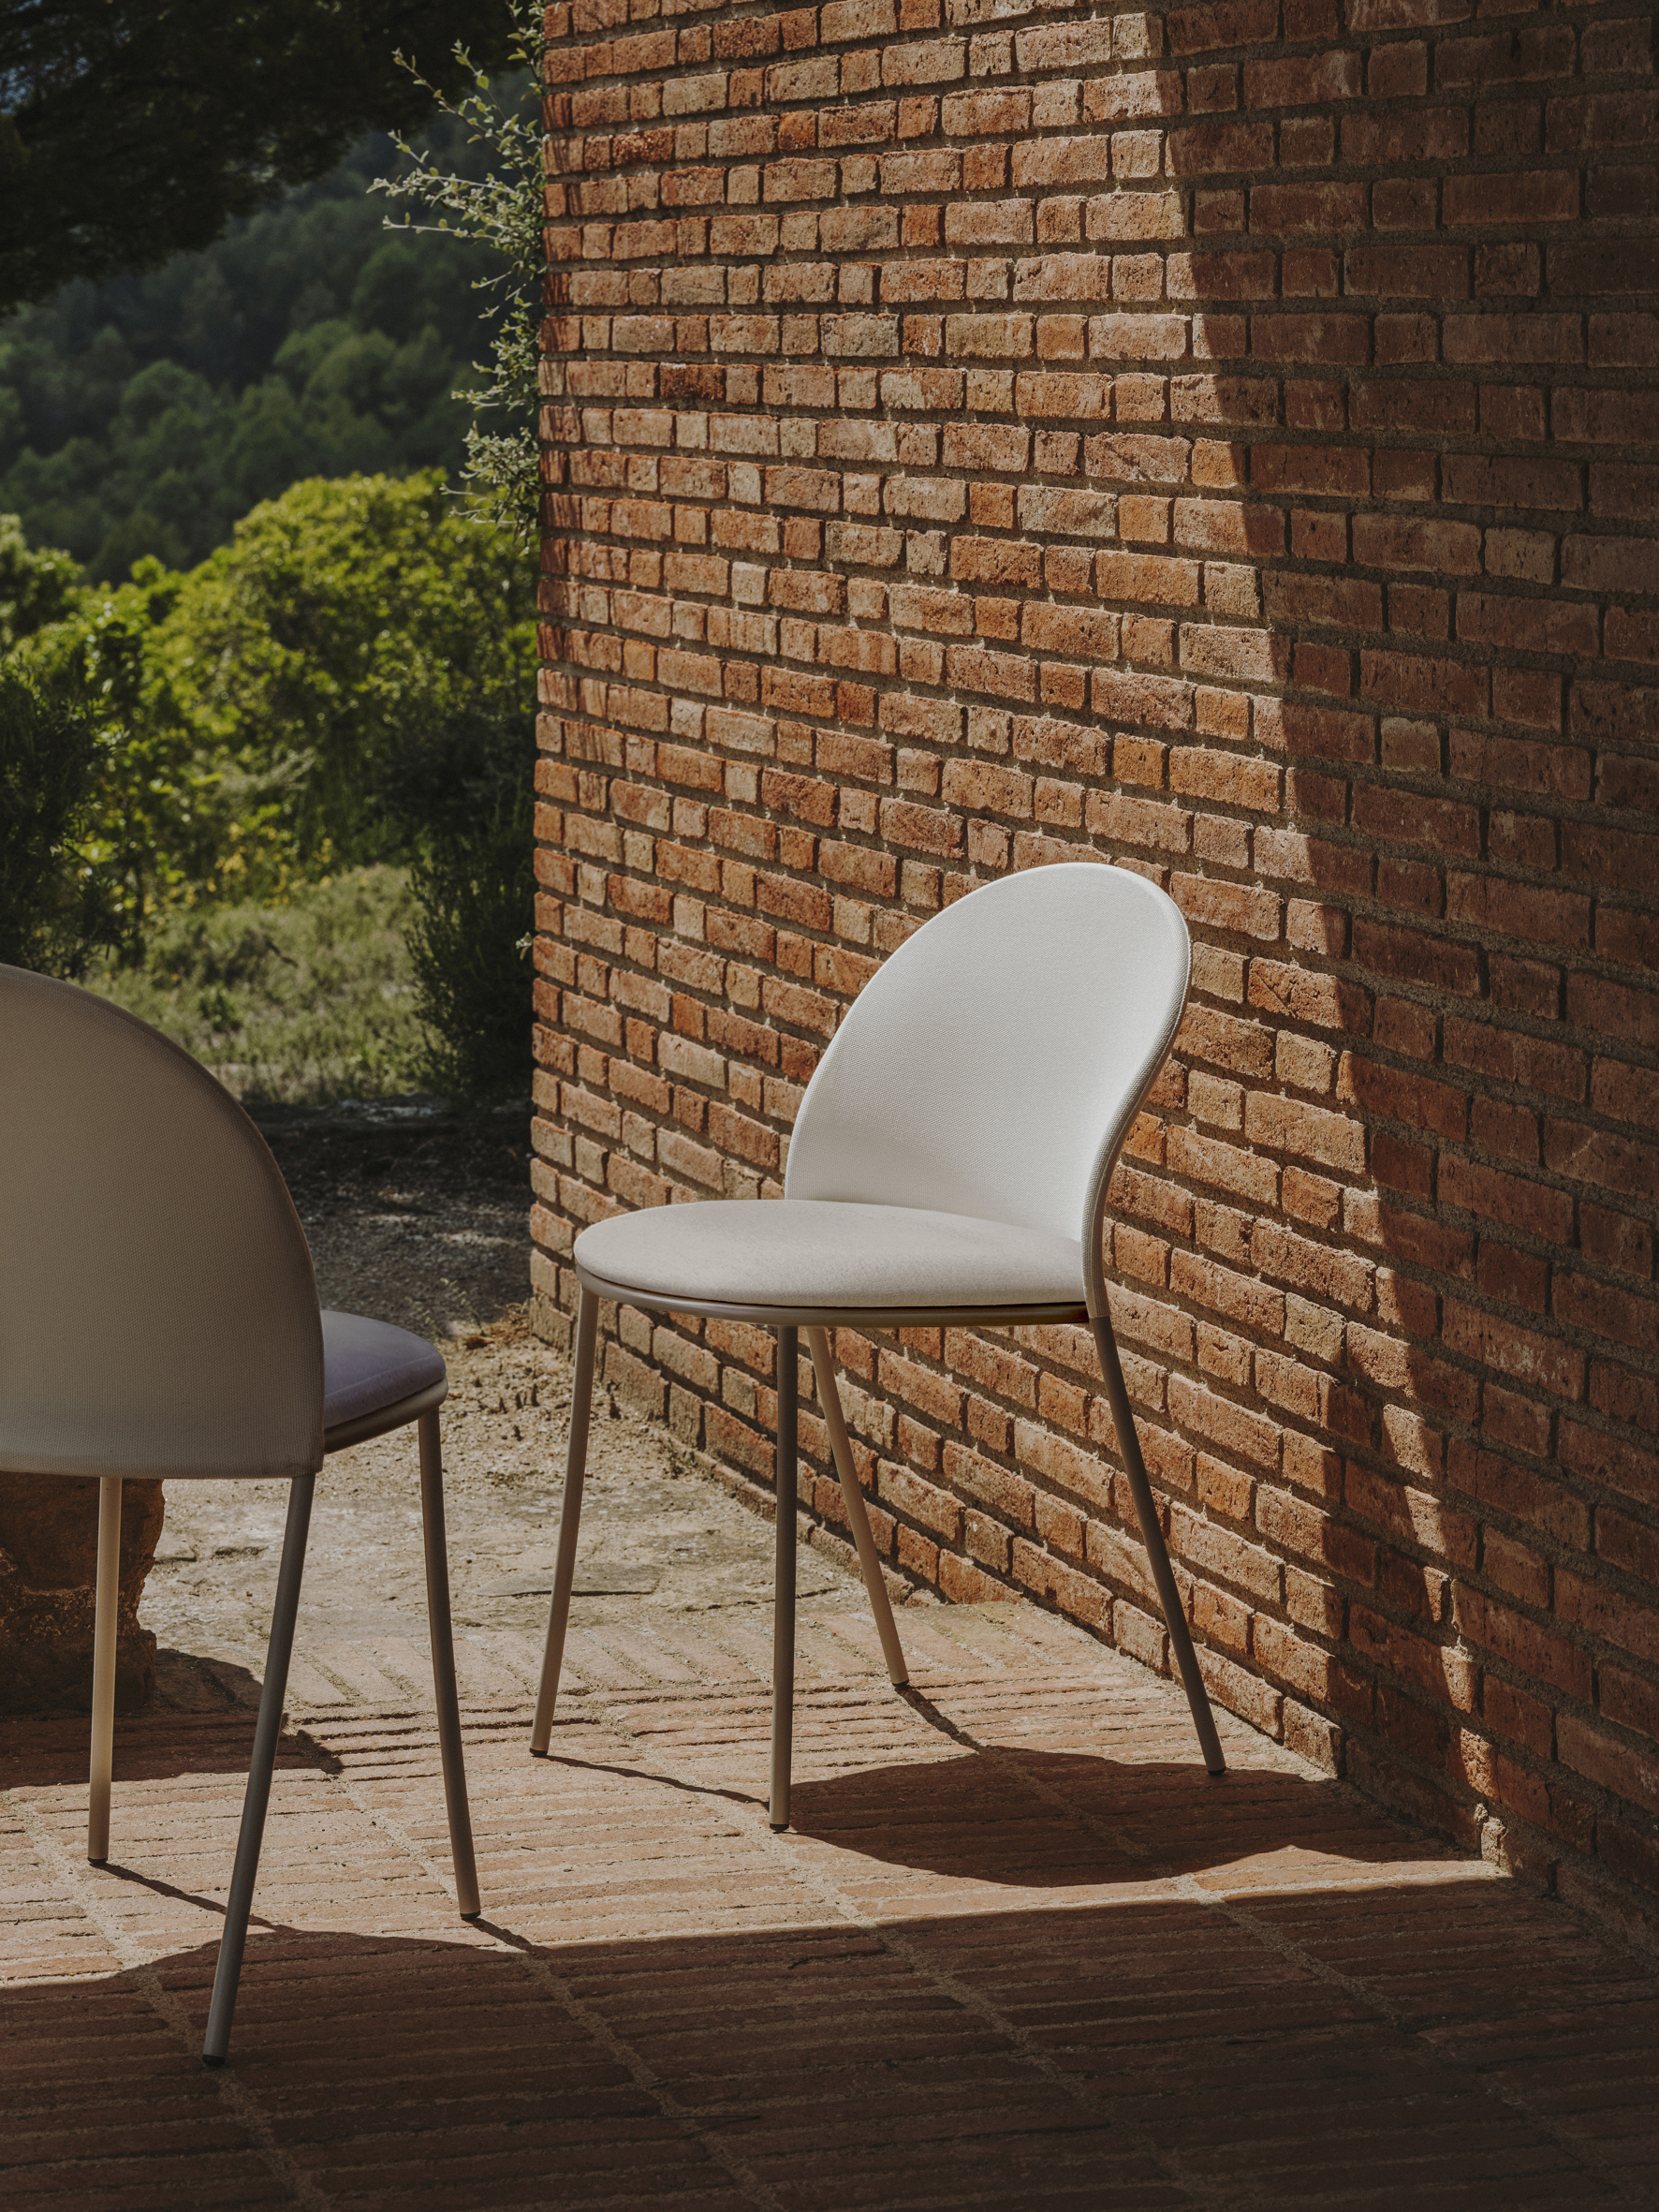 stories - rewriting the rules of outdoor furniture